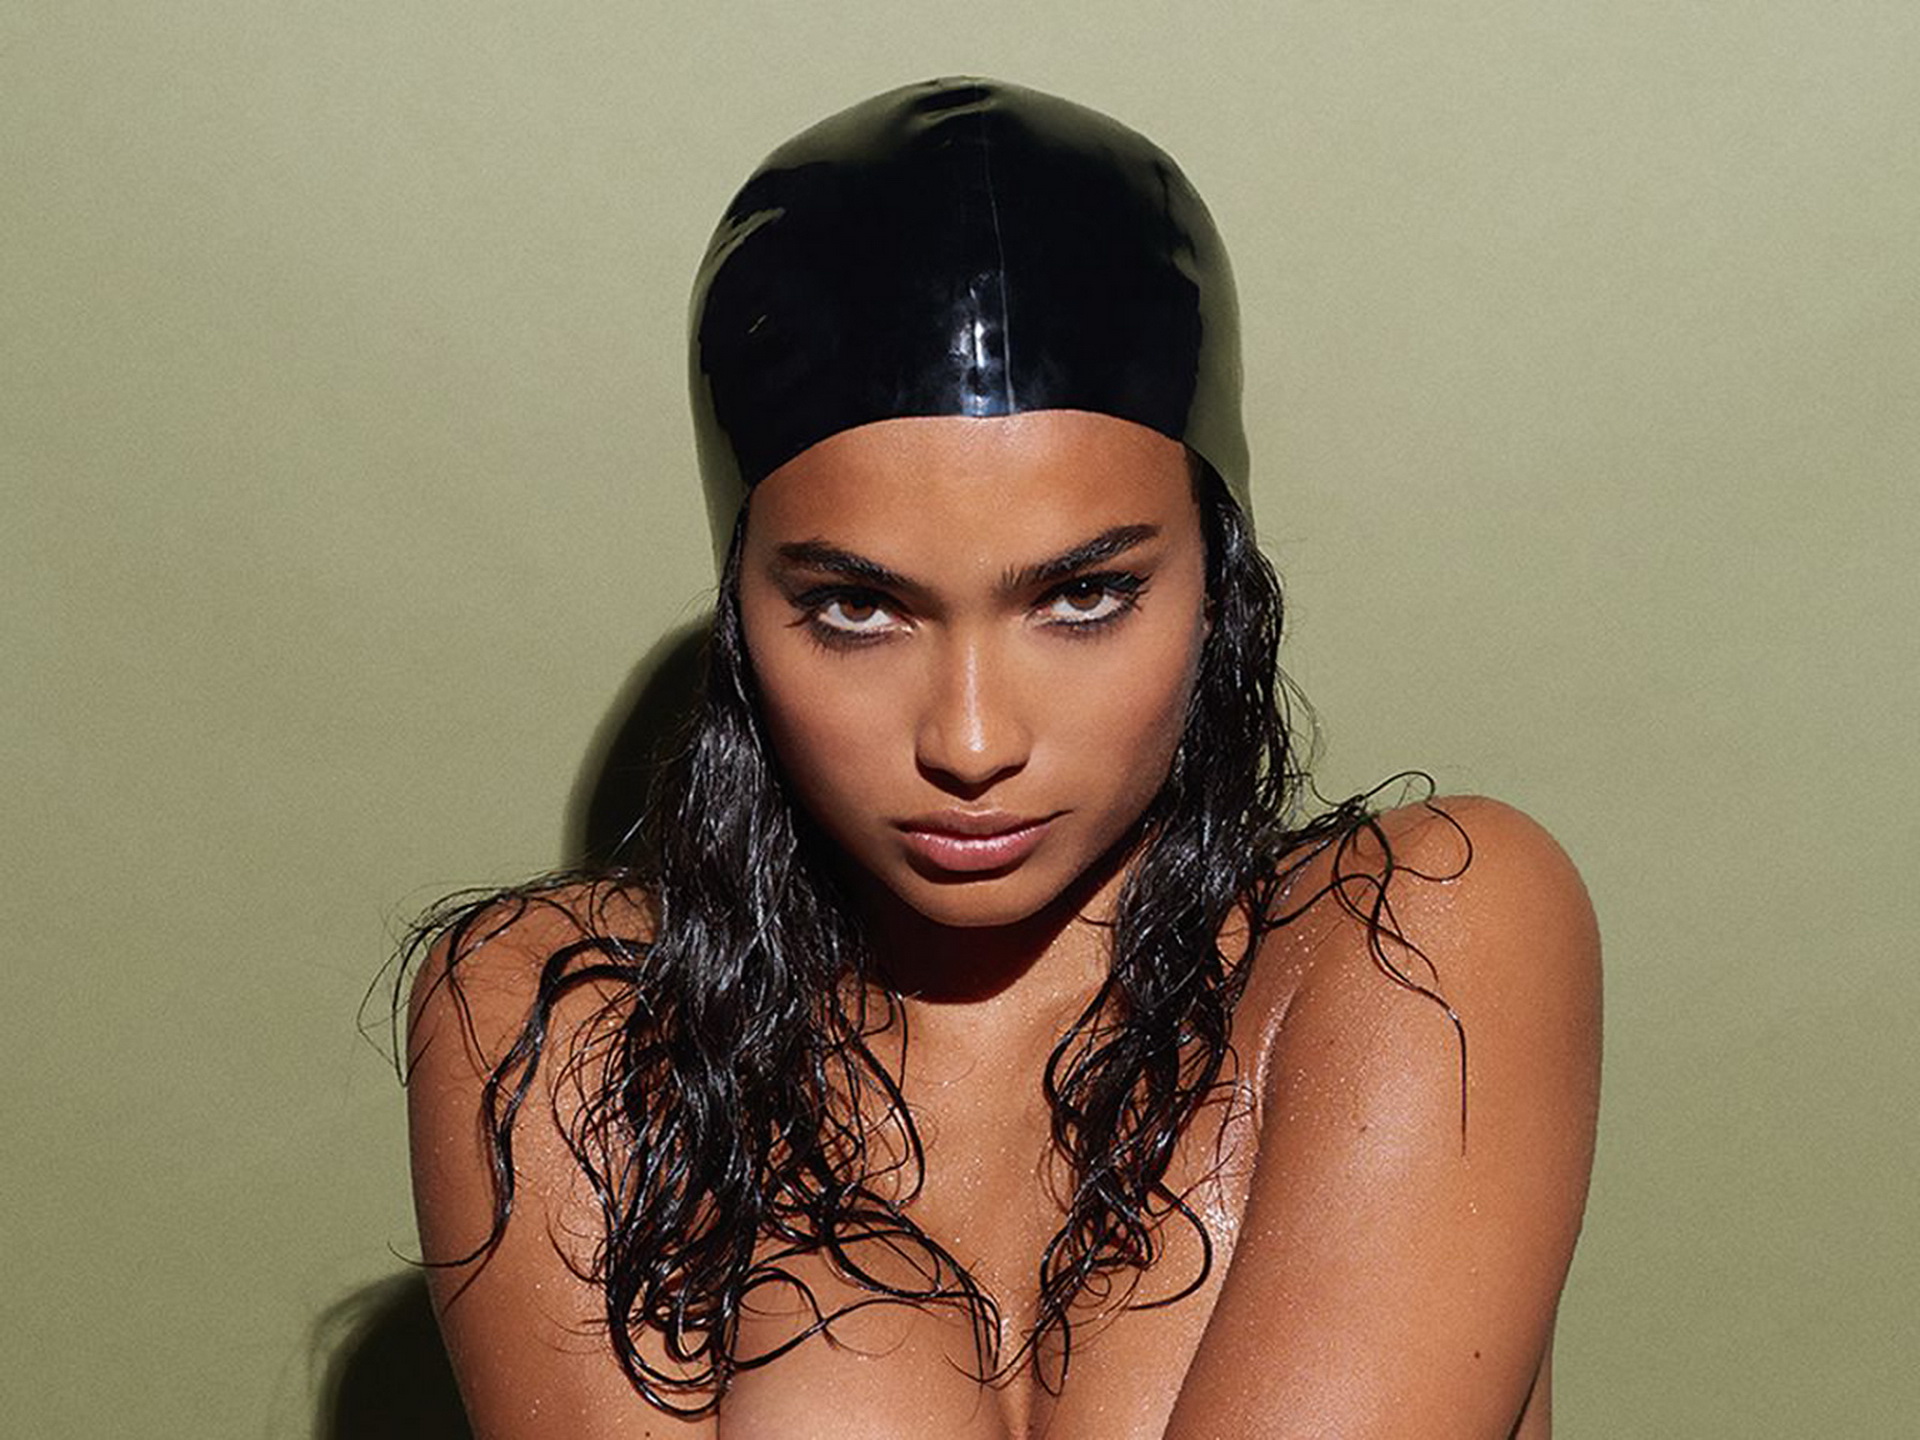 Kelly Gale topless for Chris Heads photo shoot 15x HQ photos 14.jpg